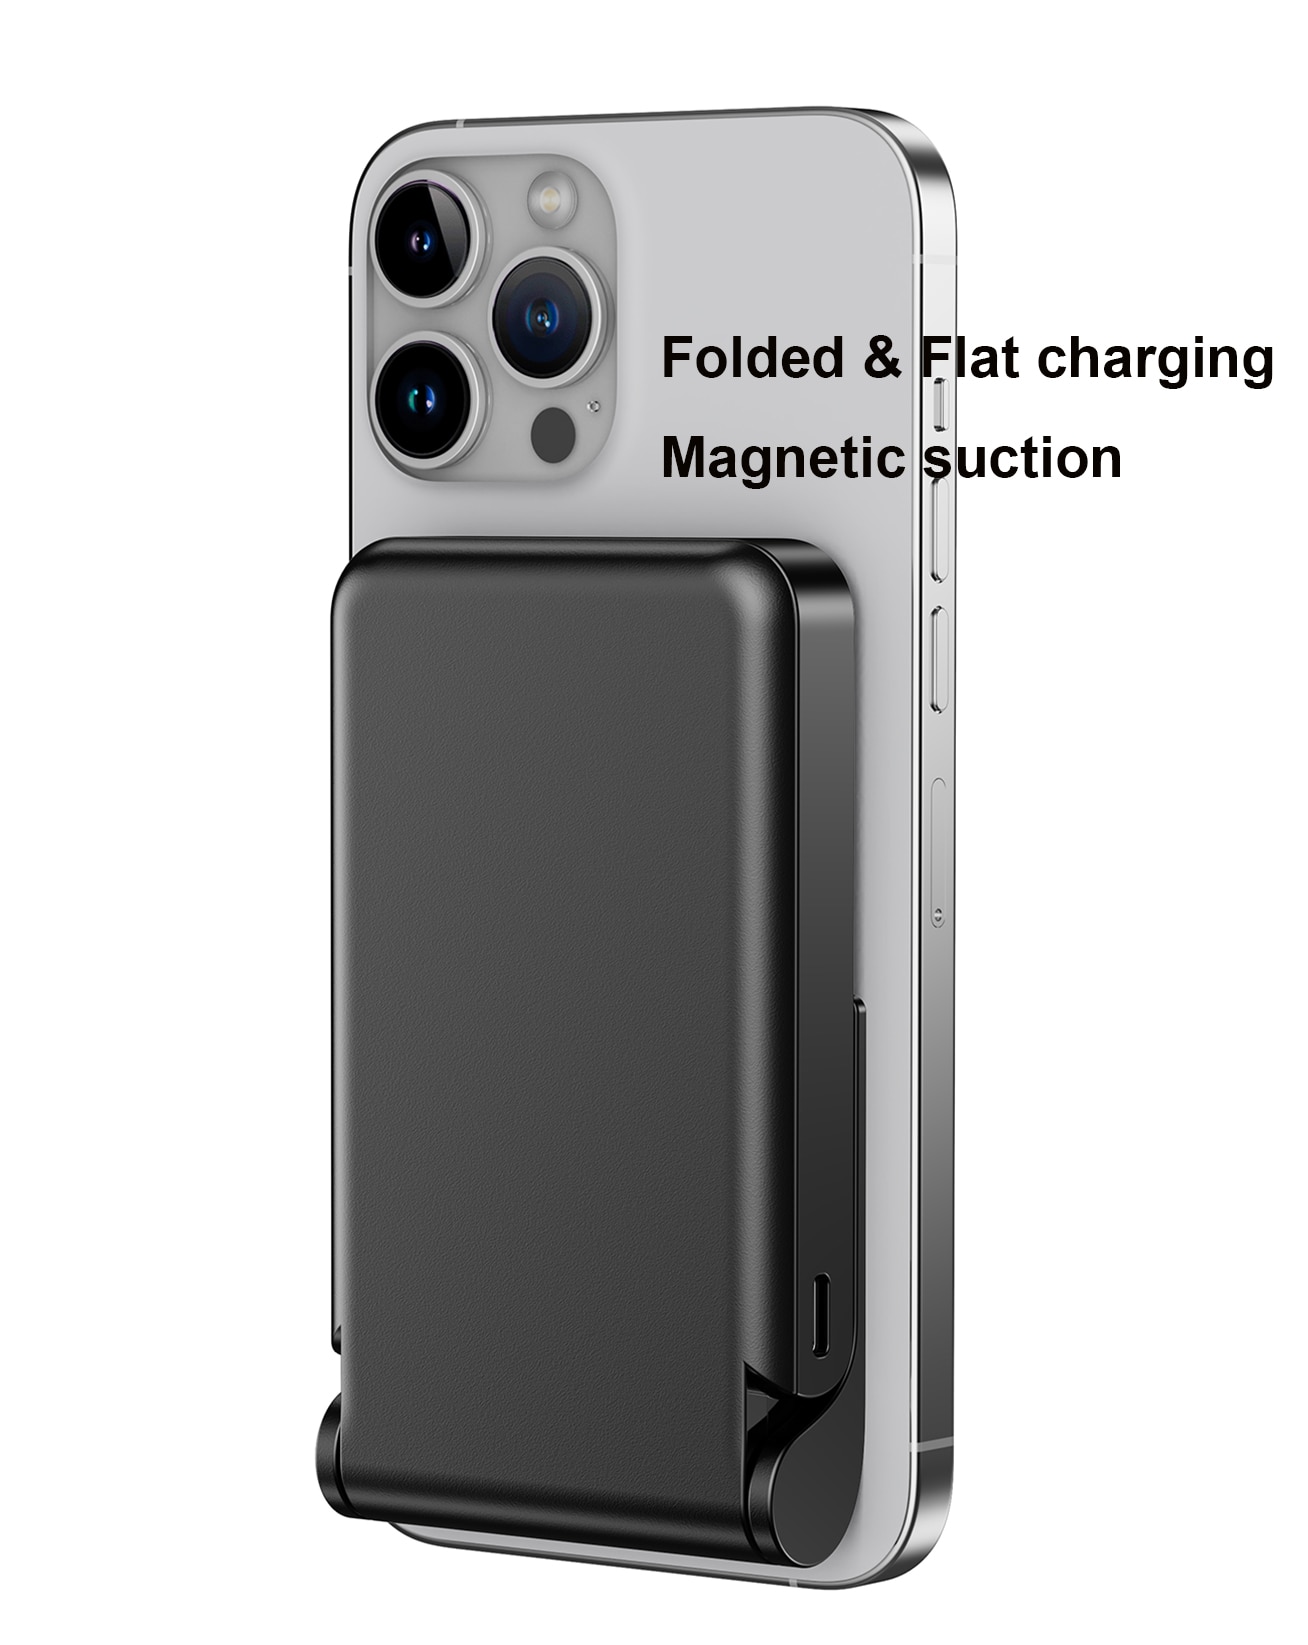 Magnetic Wireless Power Bank 5000 mAh Foldable Stand